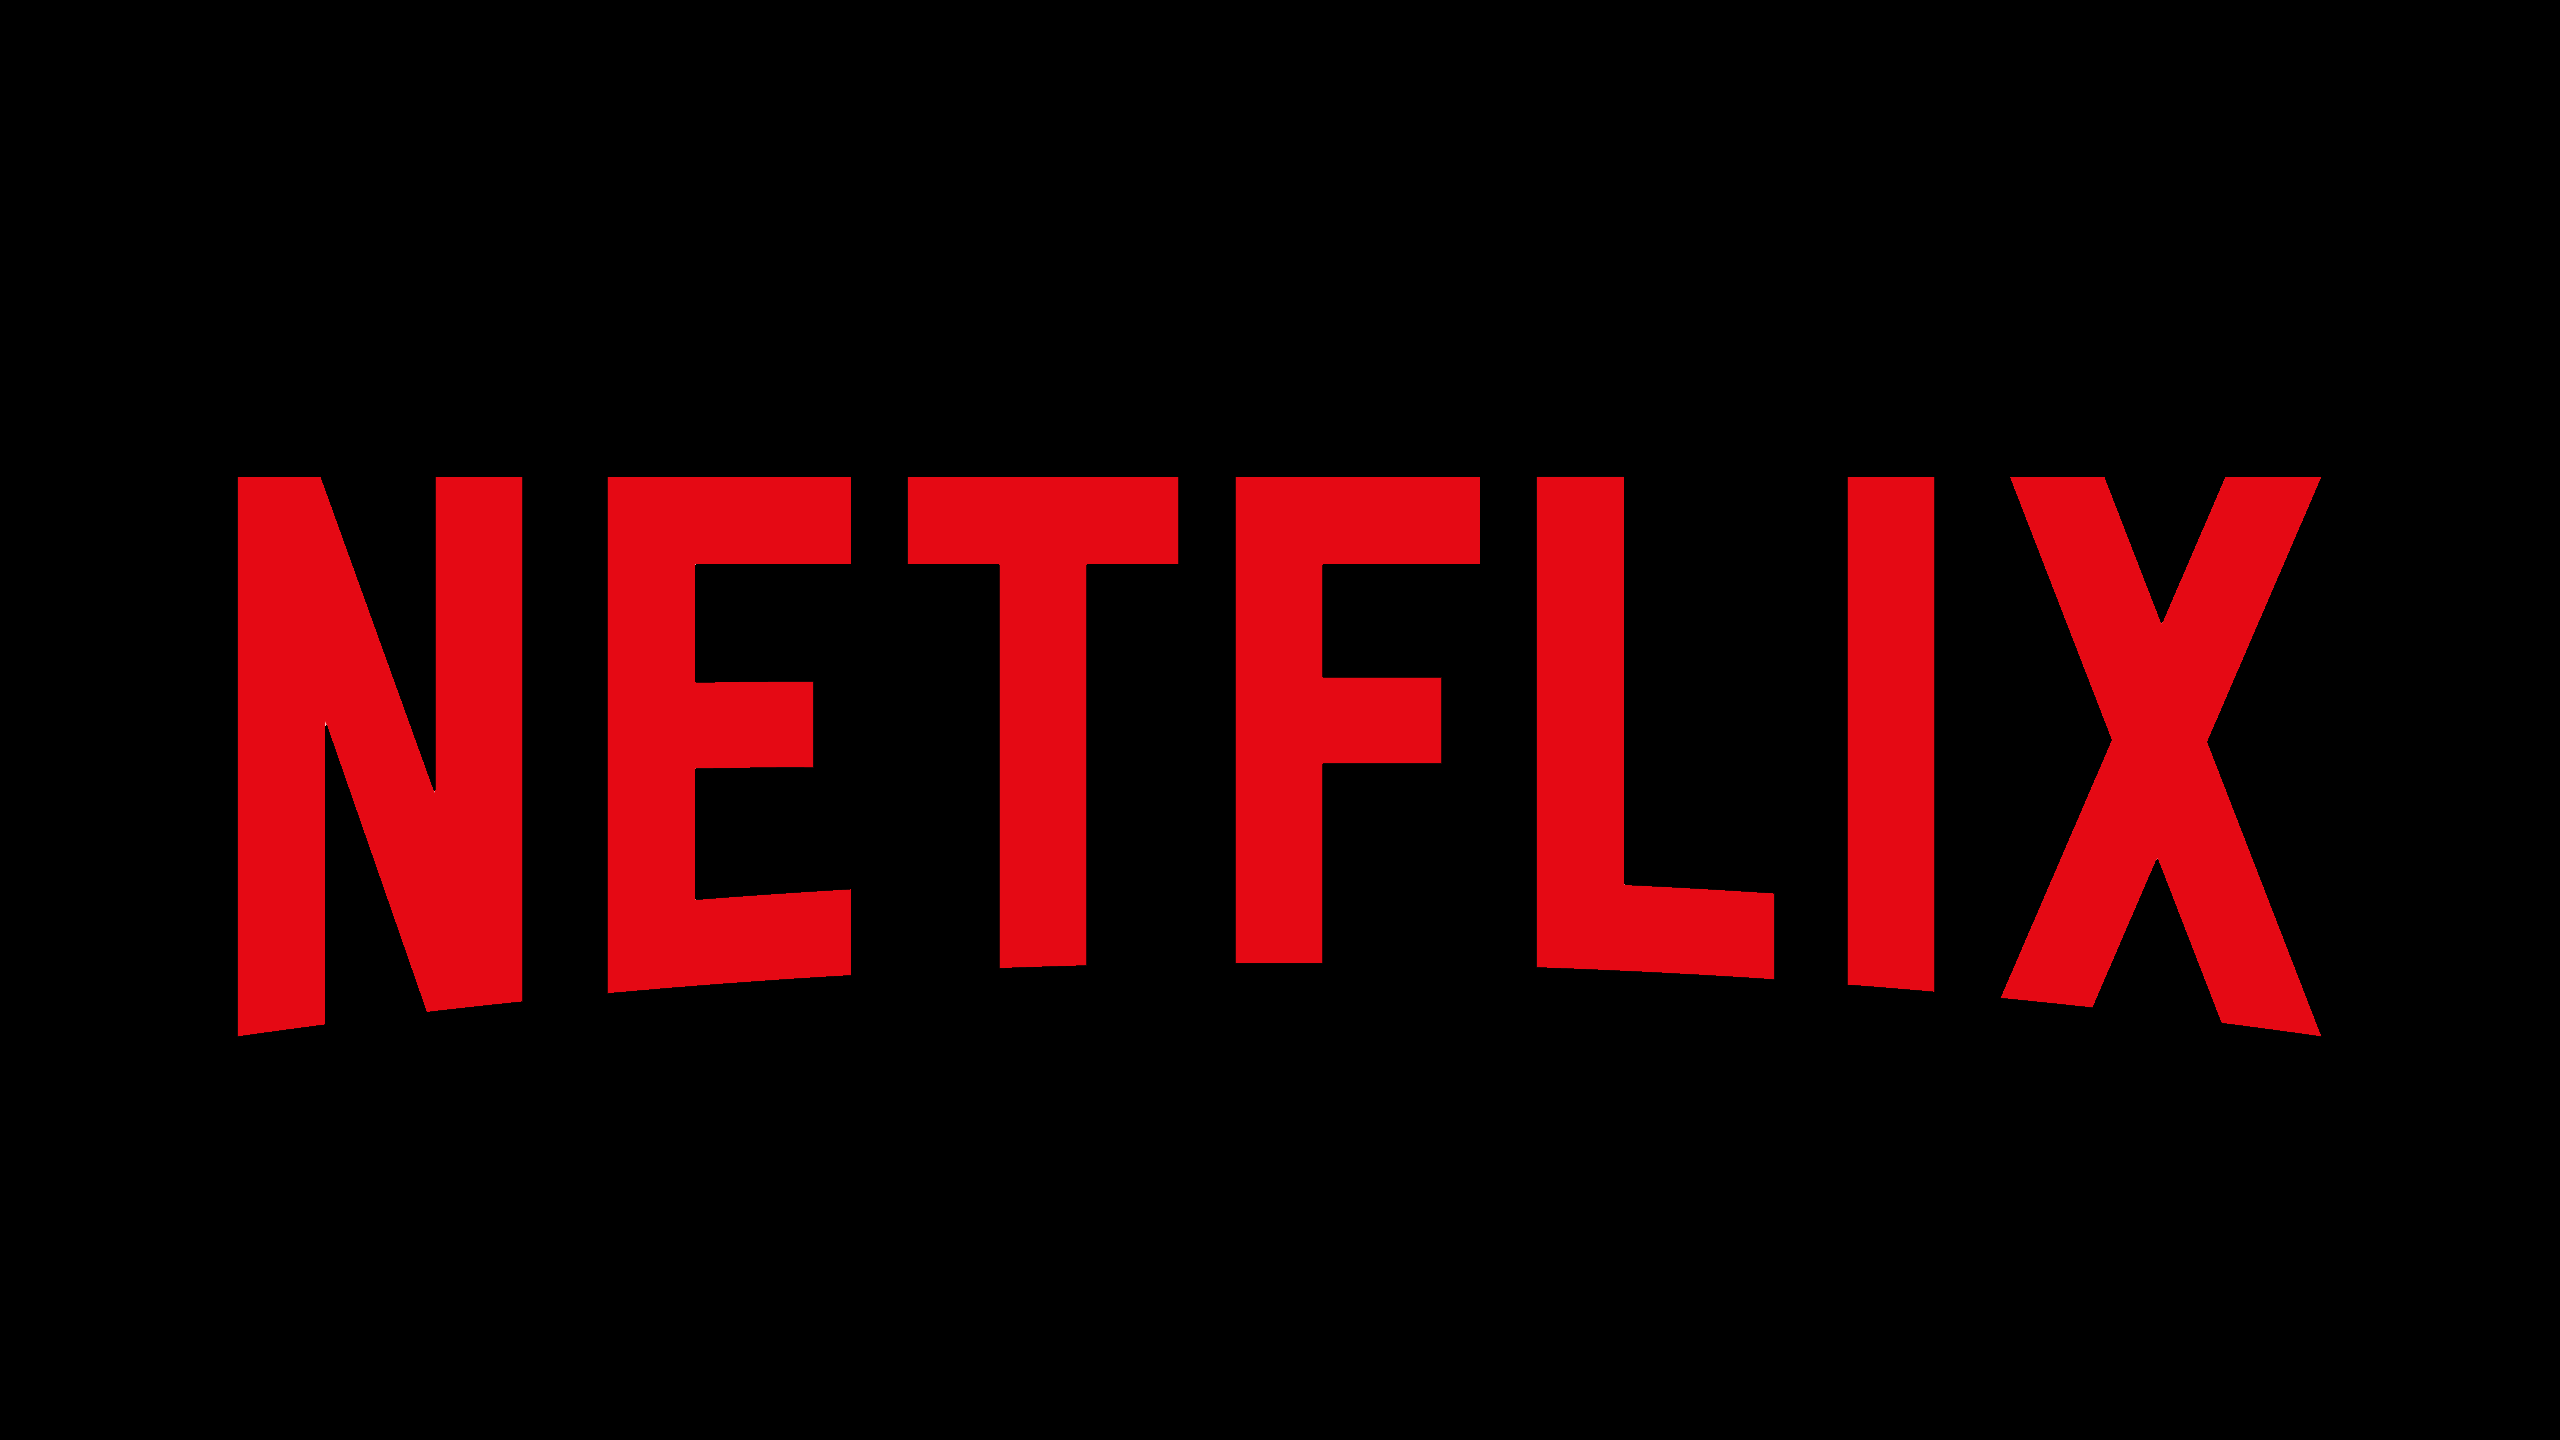 Netflix's mobile gaming platform is expanding to Spain and Italy!